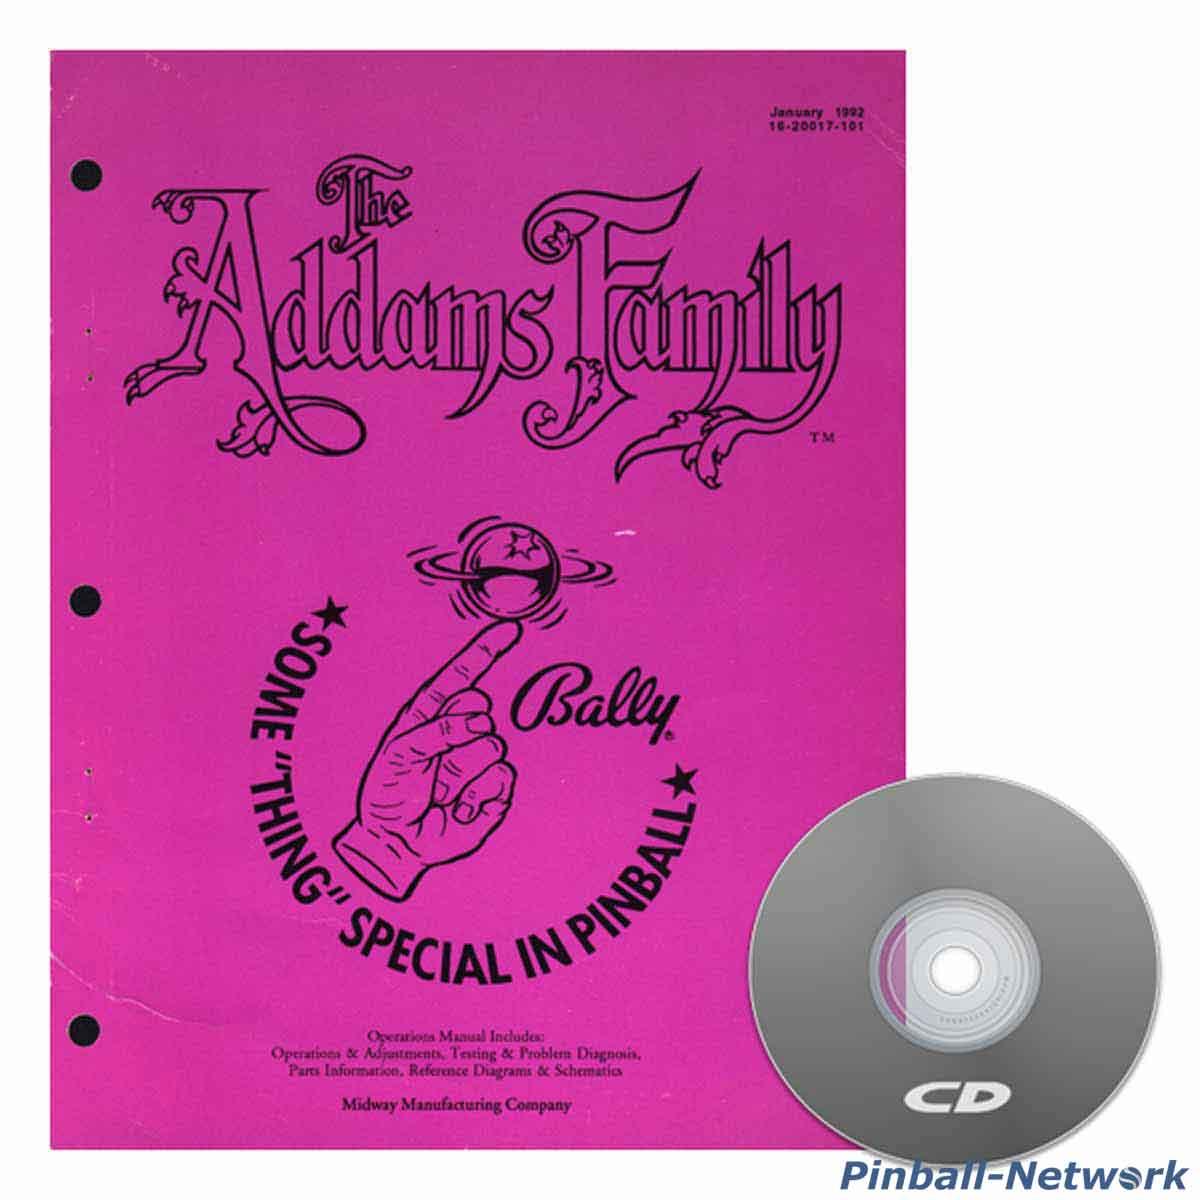 The Addams Family Operations Manual